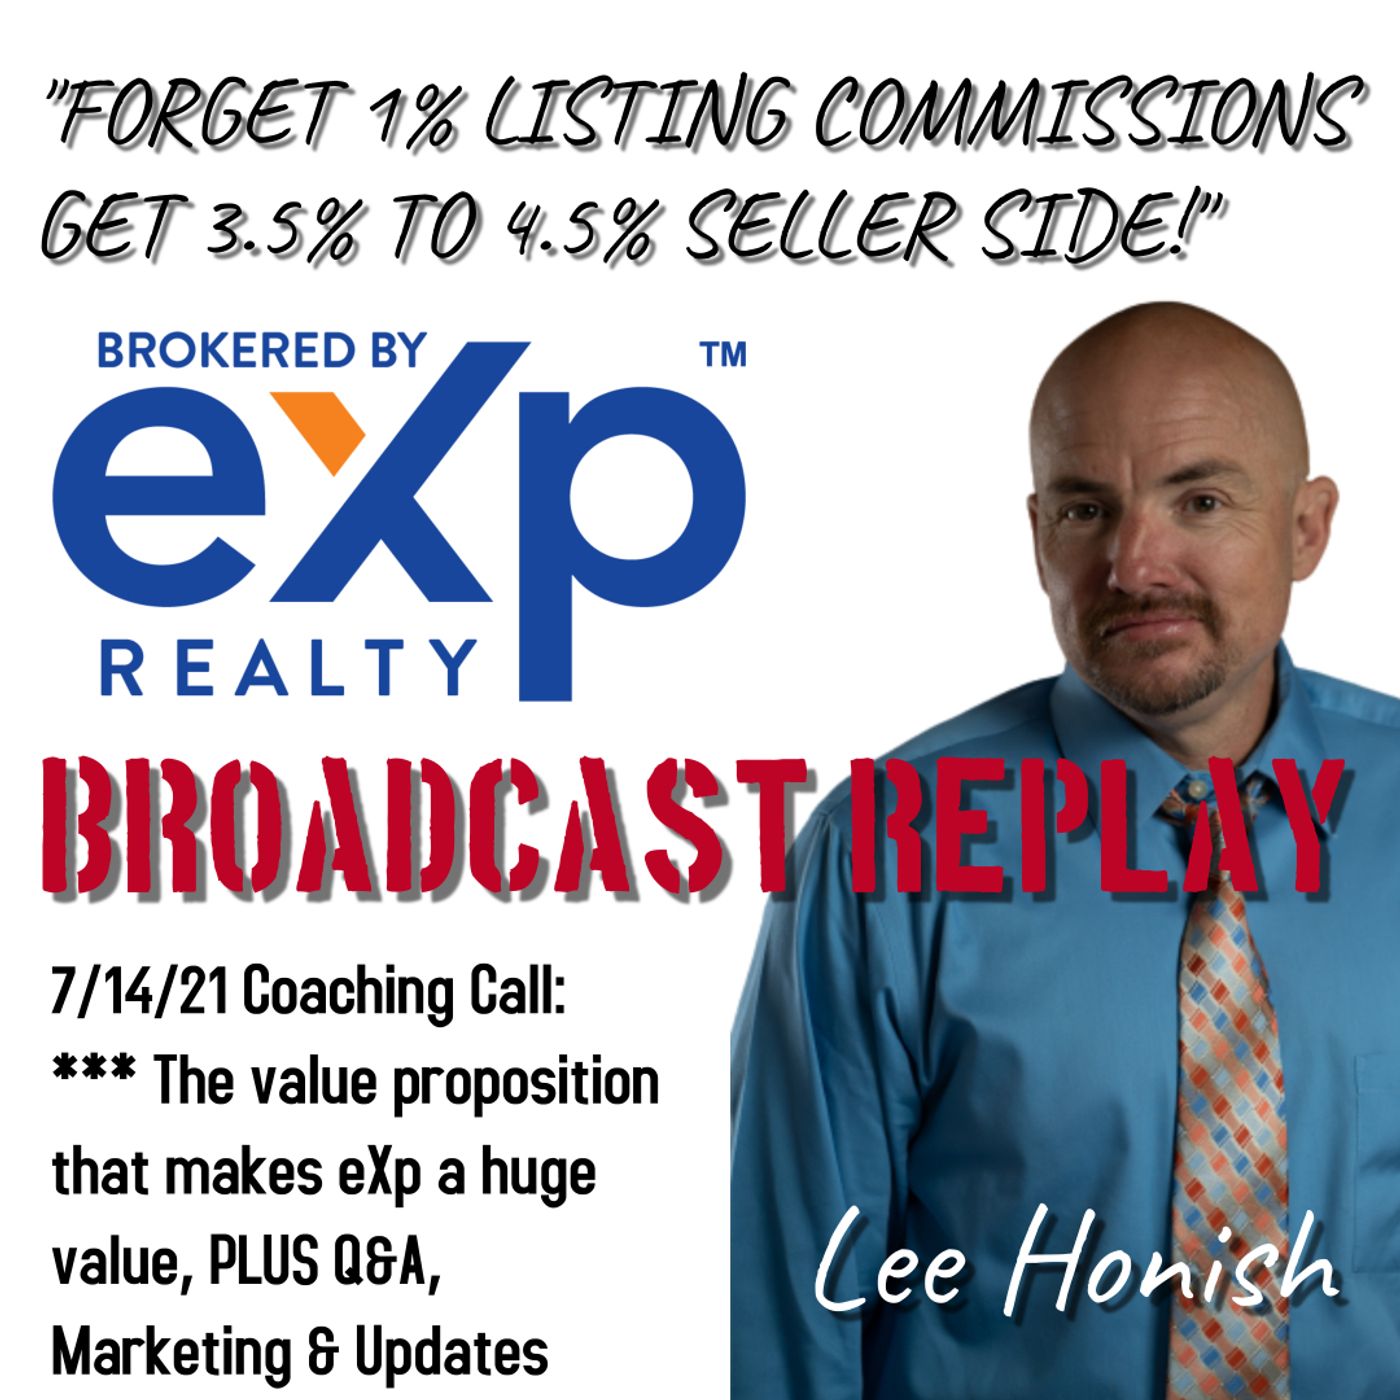 MAX Commission of 4.5% Seller Side on Pre-Foreclosure-Listings | Lee Honish | 833-969-4673